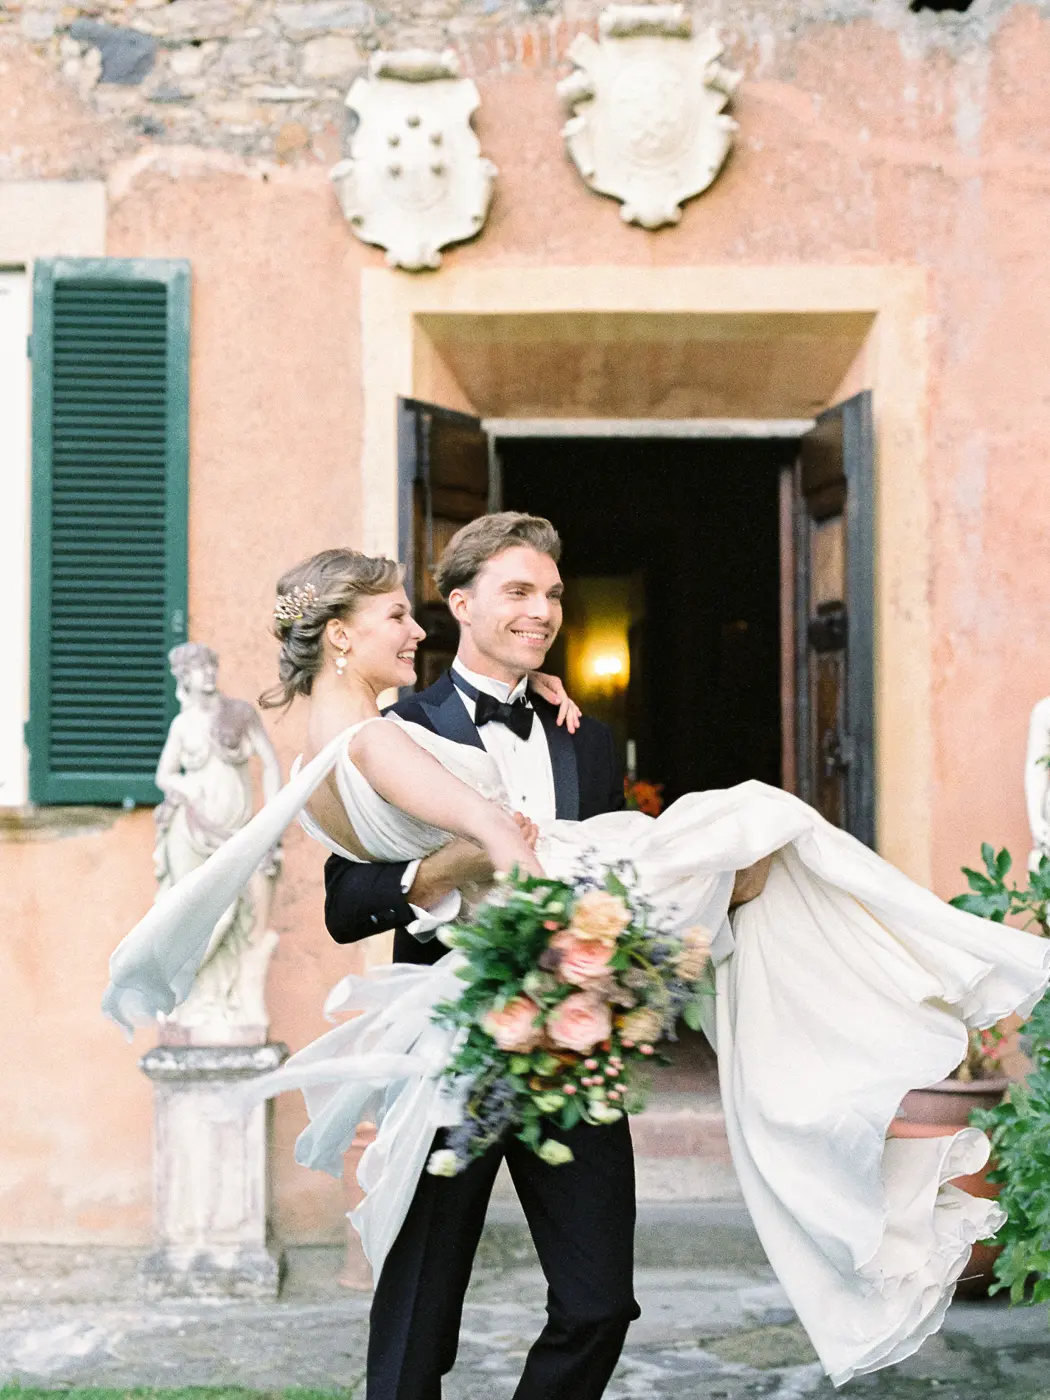 A fairytale moment unfolds as the newlyweds. Groom carrying bride holding her in his arms in the courtyard of a stunning medieval villa in Tuscany